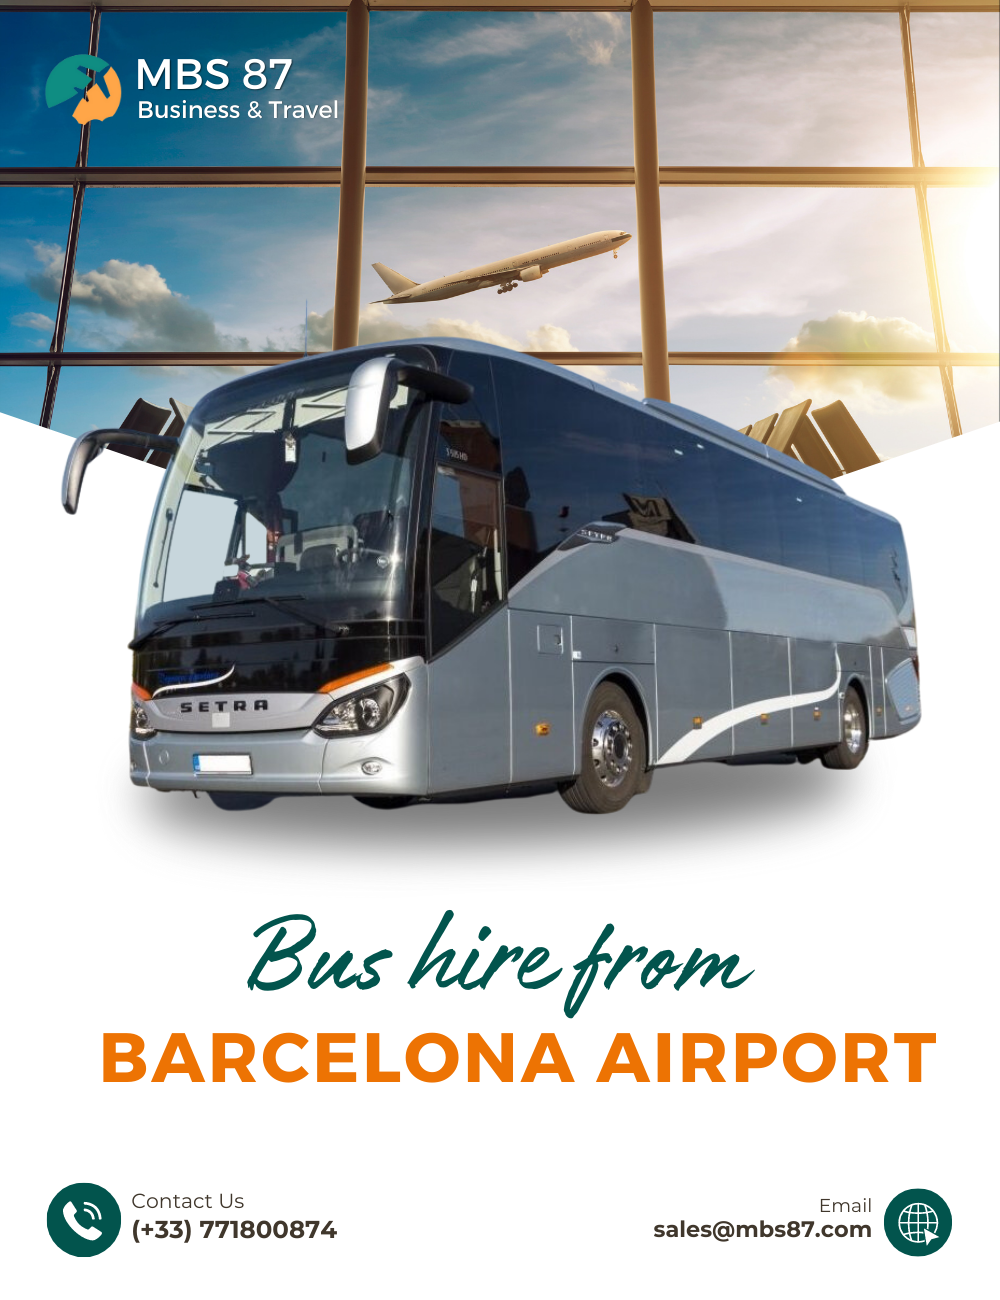 Convenient and Reliable: Why Choose MBS 87 Store for Your Barcelona Airport Transfers